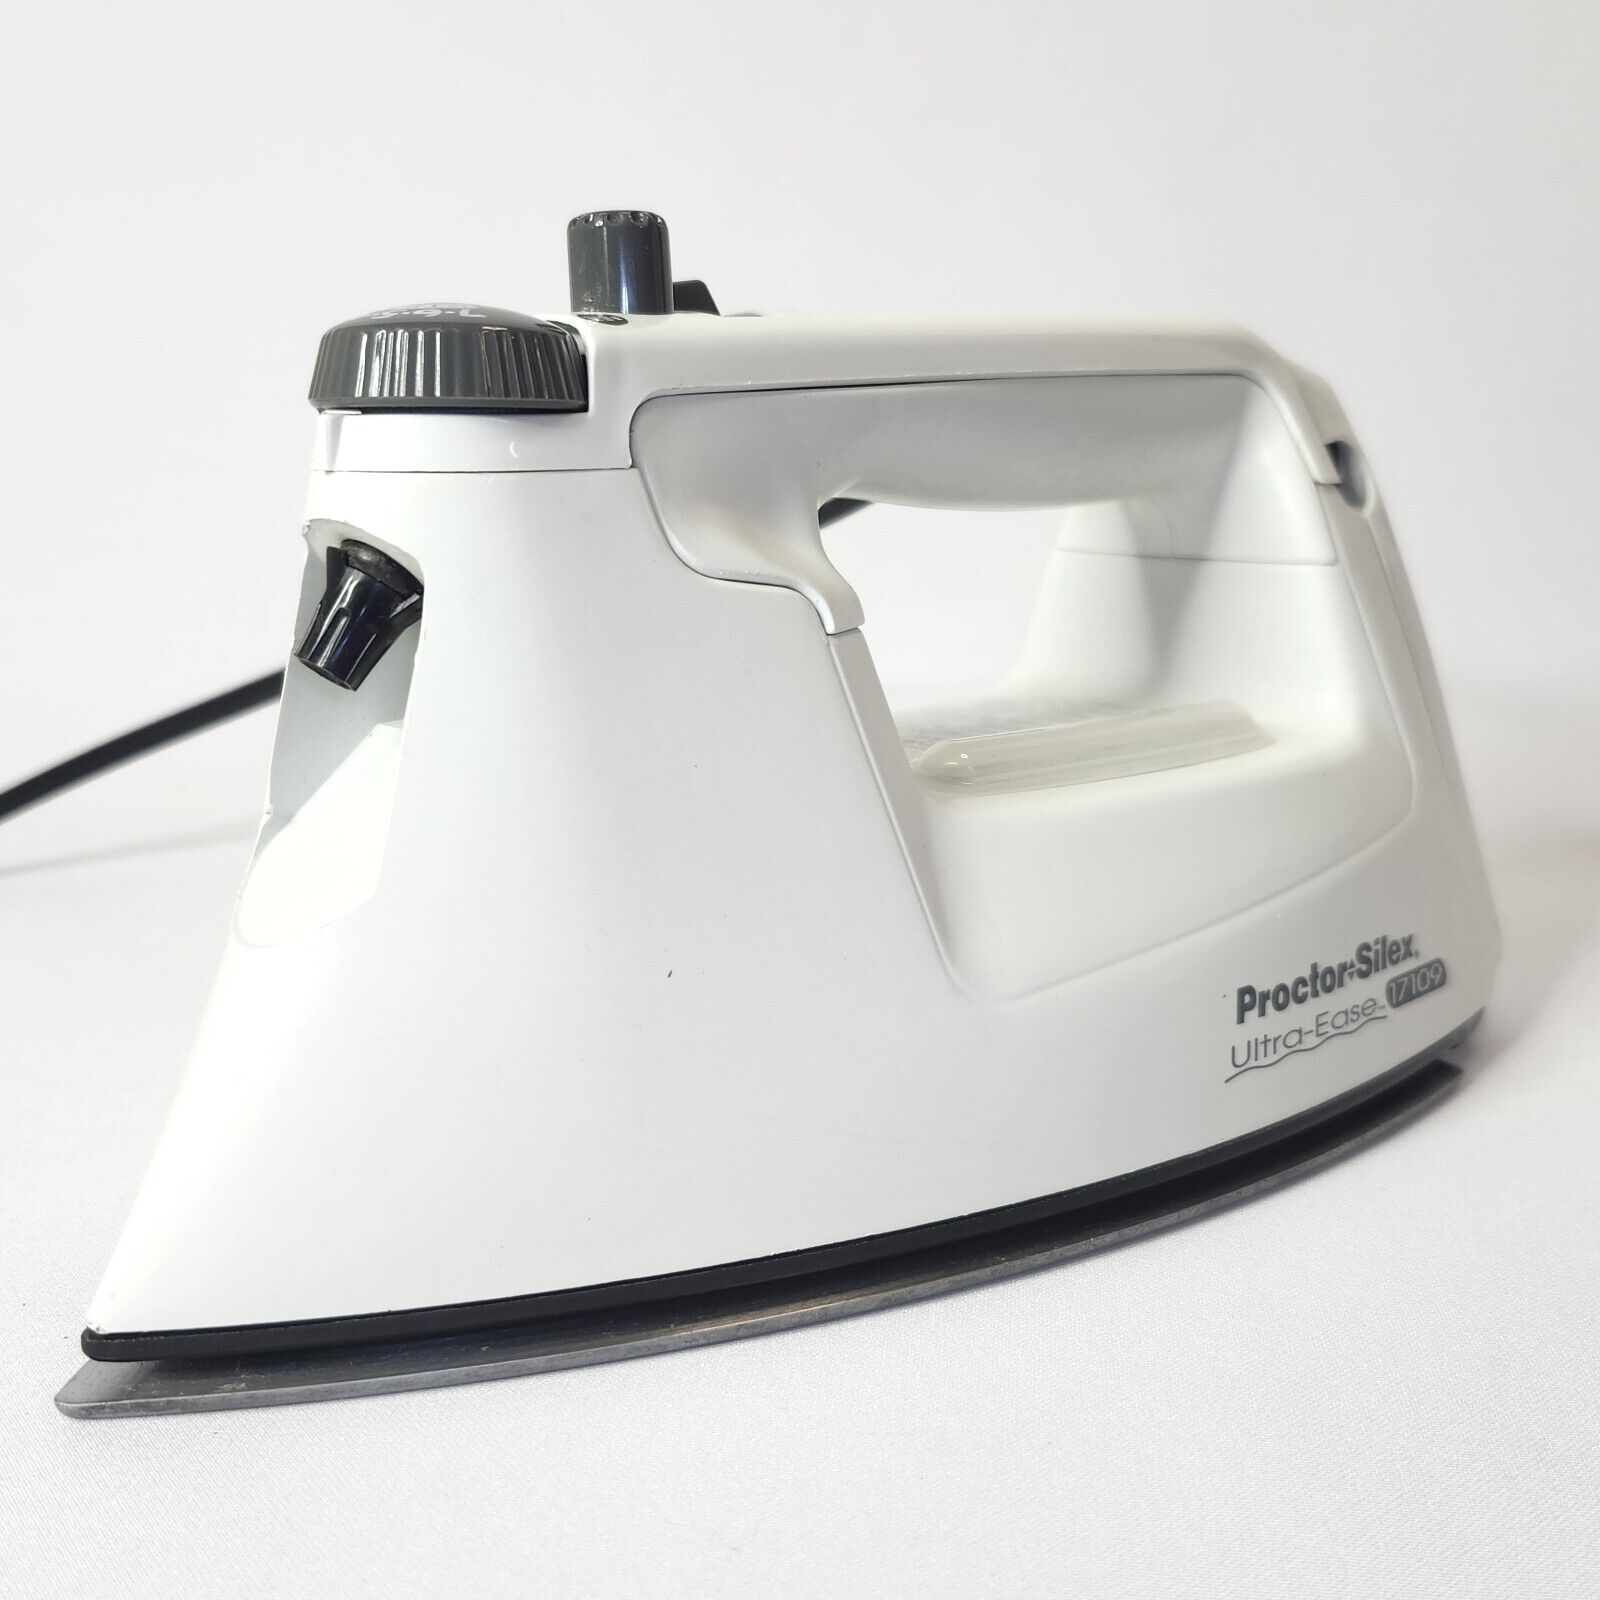 Proctor Silex Ultra Ease Iron 17109 Steam or Dry 7 Fabric Settings